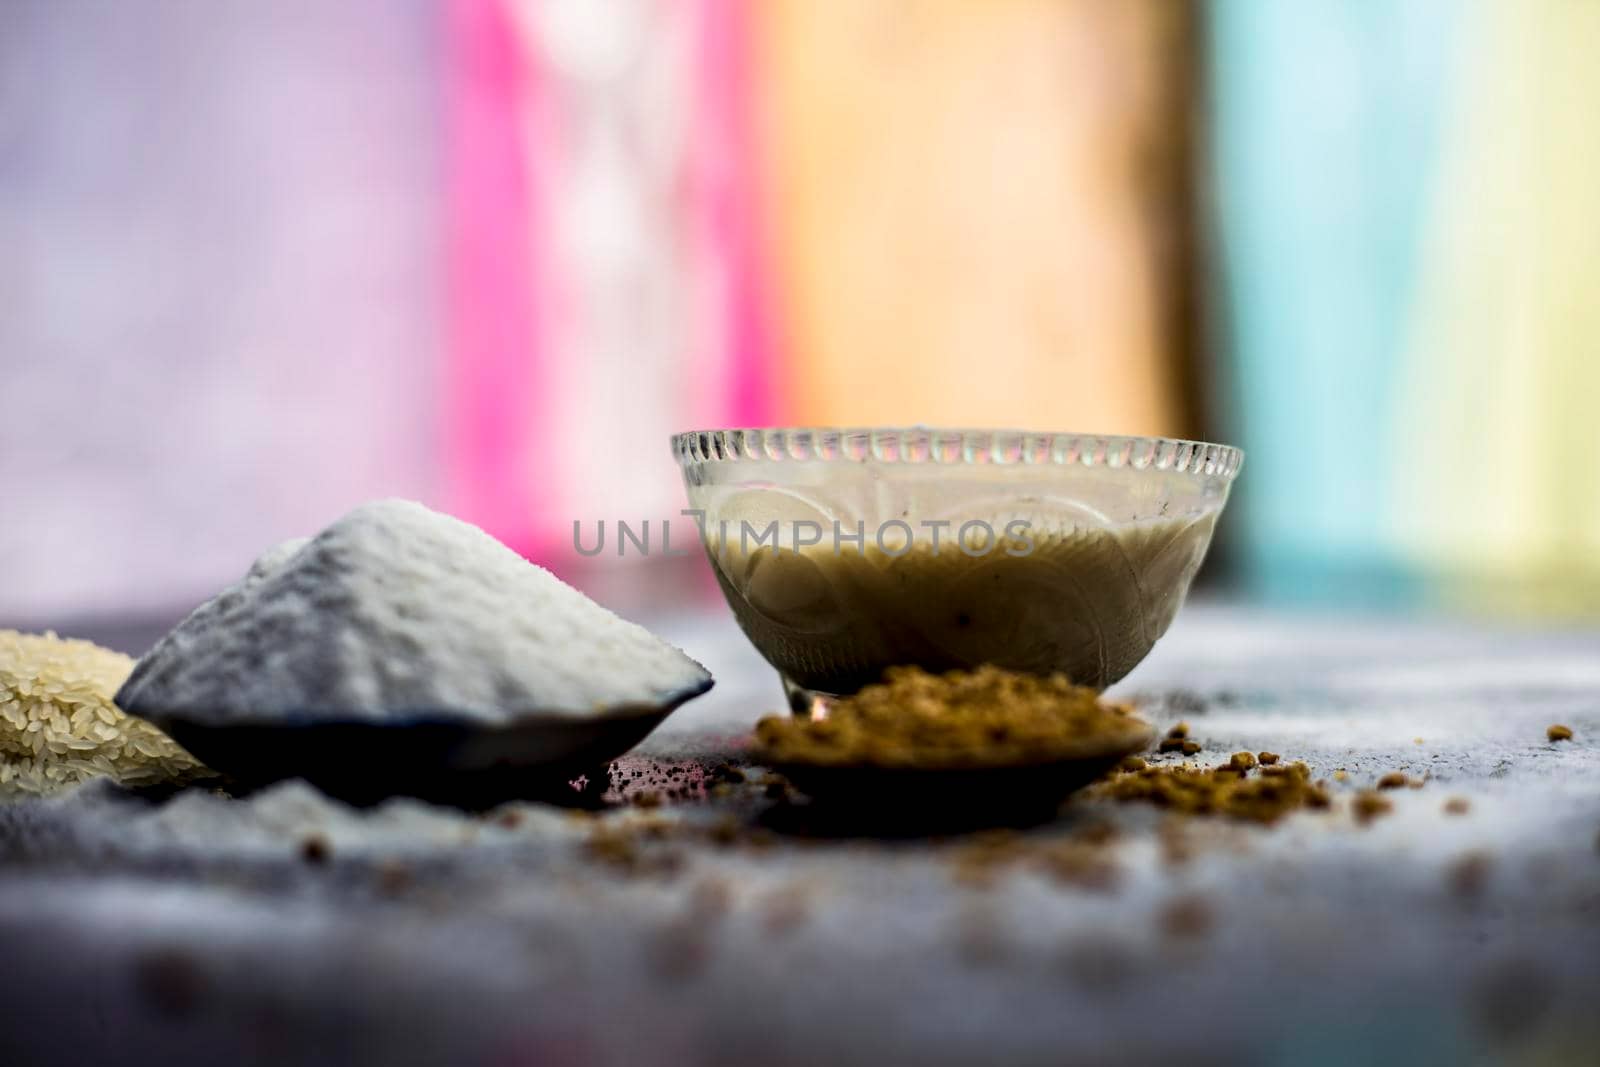 Hair growth remedy of rice flour water and fenugreek/coriander/parsley seeds powder on wooden surface and its paste in a glass bowl with some rice flour spread on the surface. by mirzamlk